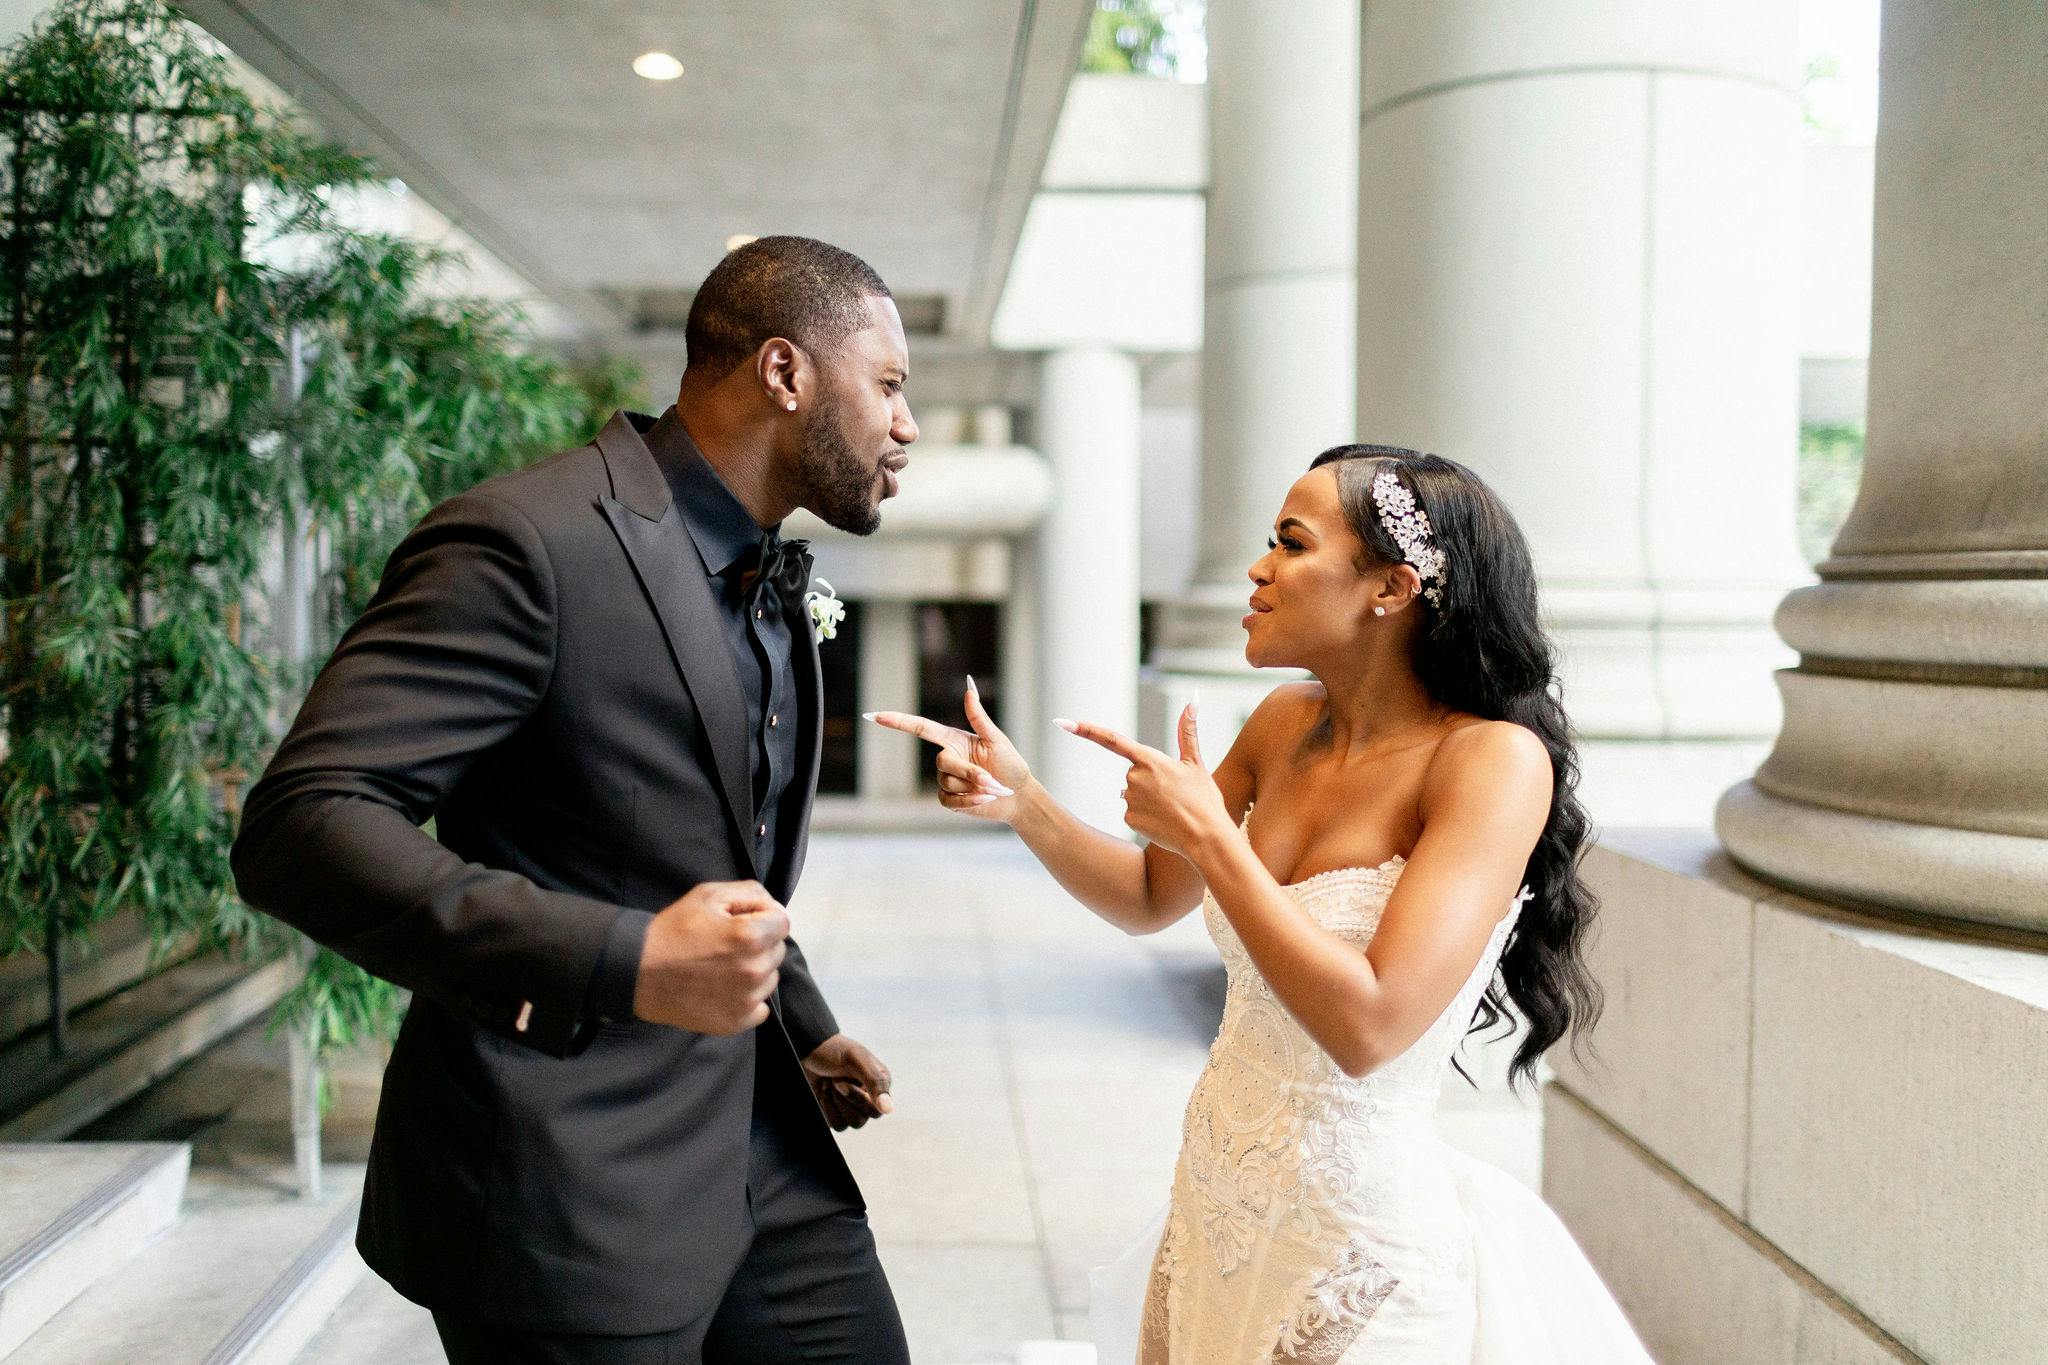 Bride and groom having a silly moment, bride doing finger guns at groom in all black suit | PartySlate